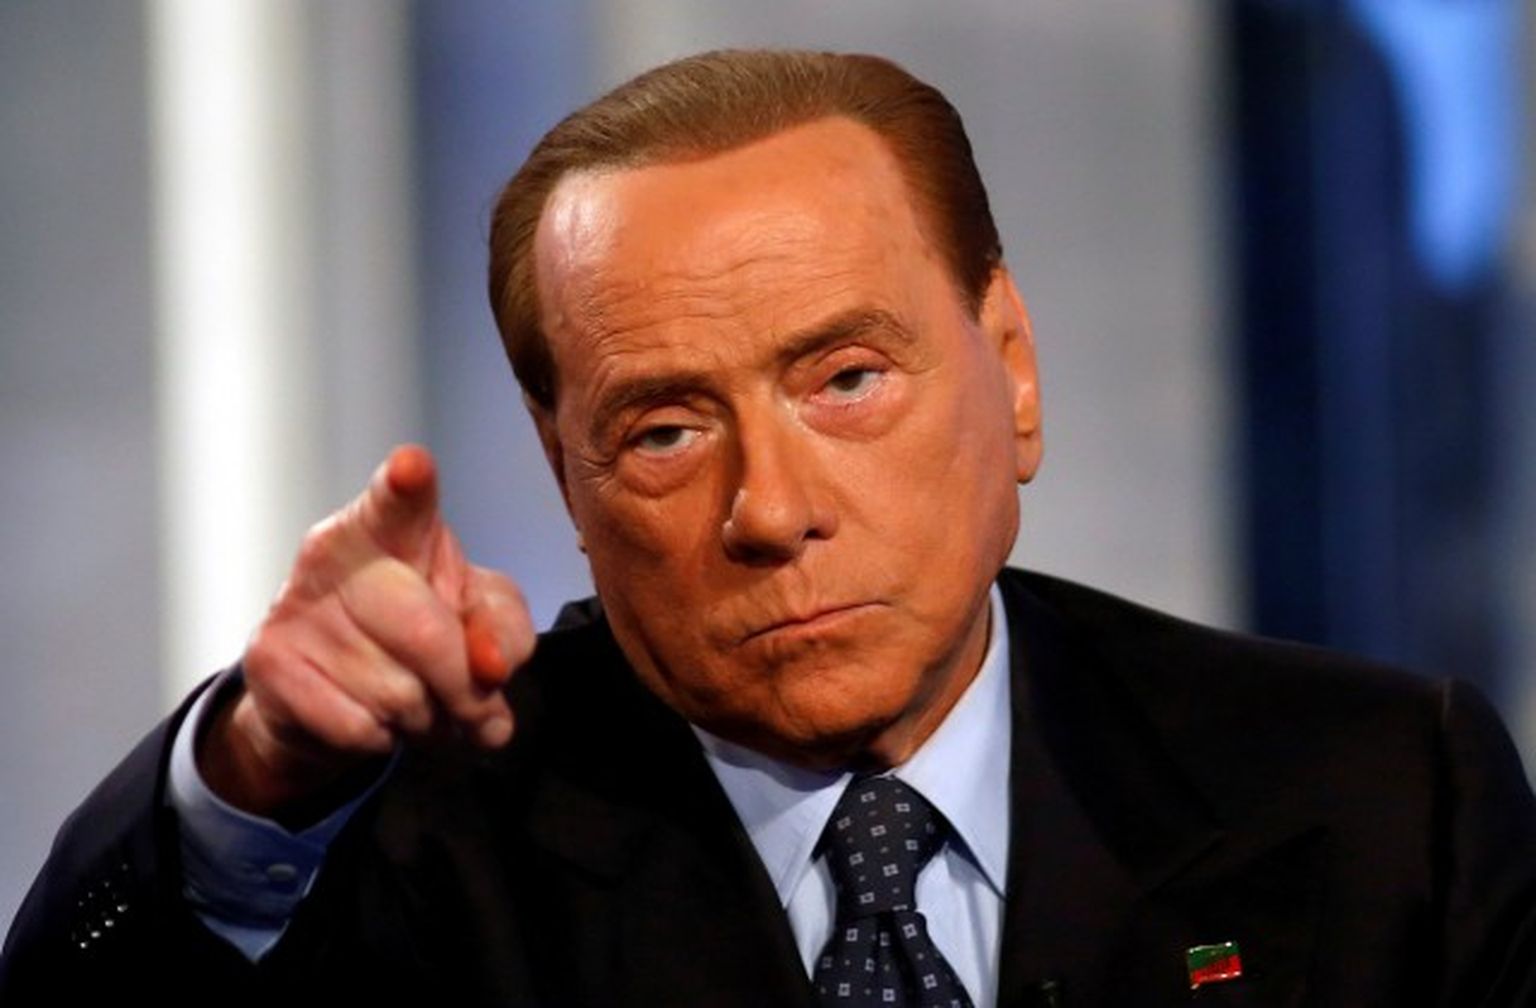 Italy s former Prime Minister Silvio Berlusconi gestures as he attends television talk show "Porta a Porta" (Door to Door) in Rome, Italy, November 30, 2016. REUTERS/Remo Casilli     TPX IMAGES OF THE DAY